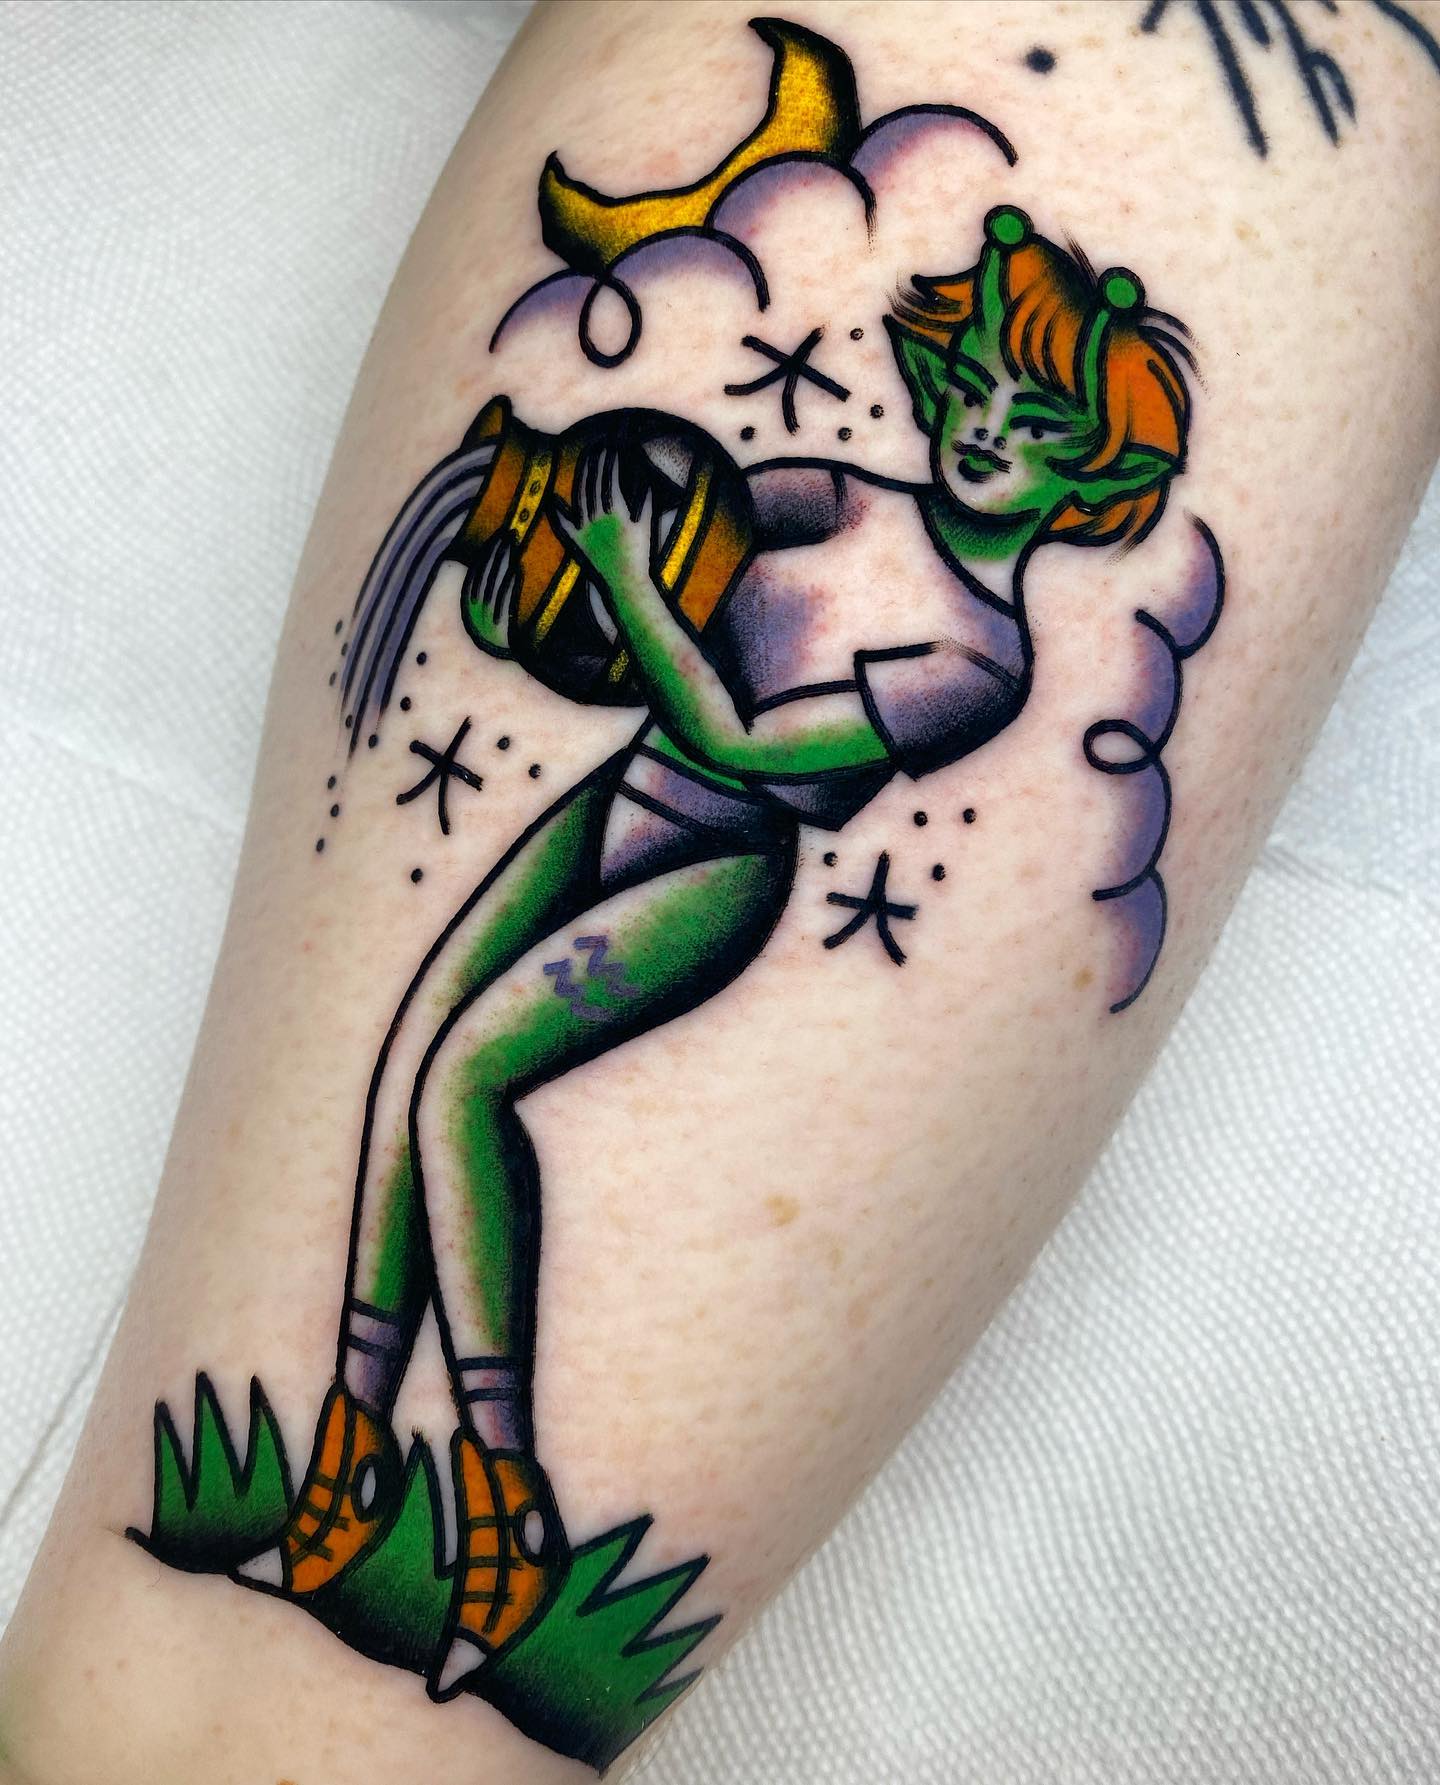 A little alien Aquarius girl sounds weird, doesn't it? There are always goddess-like tattoos when you search for an Aquarius tattoo, so why not trying something new? This cute alien girl will cheer you up every time you look at your leg. Let's go crazy!